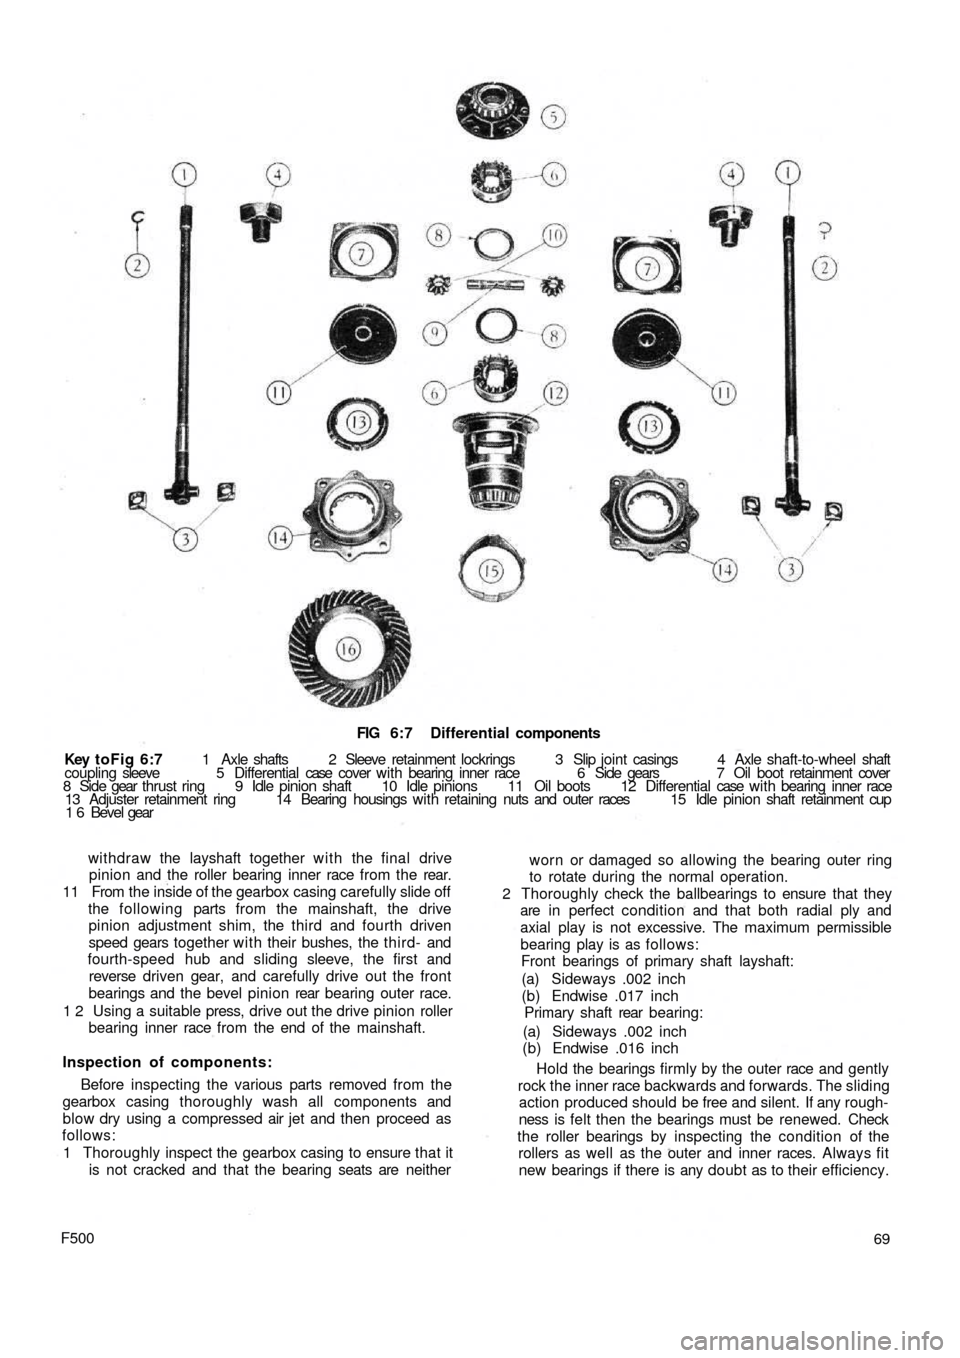 FIAT 500 1958 1.G Workshop Manual FIG 6:7  Differential components
Key toFig  6:7 1  Axle  shafts  2  Sleeve  retainment  lockrings   3   Slip  joint casings  4  Axle  shaft-to-wheel shaft
coupling sleeve  5  Differential case  cover 